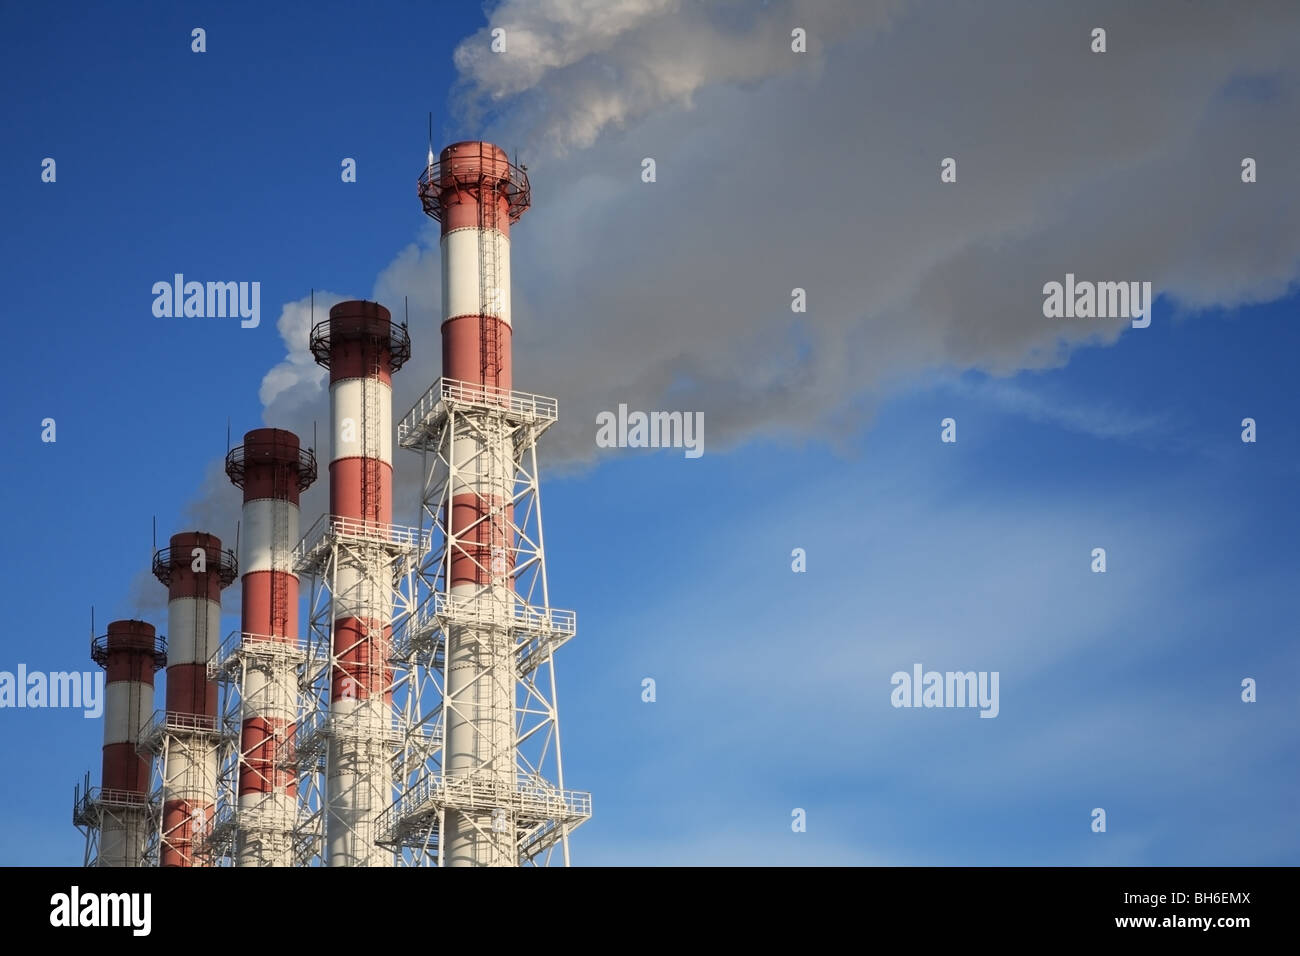 Five chimneys with steam on a blue sky background. Stock Photo